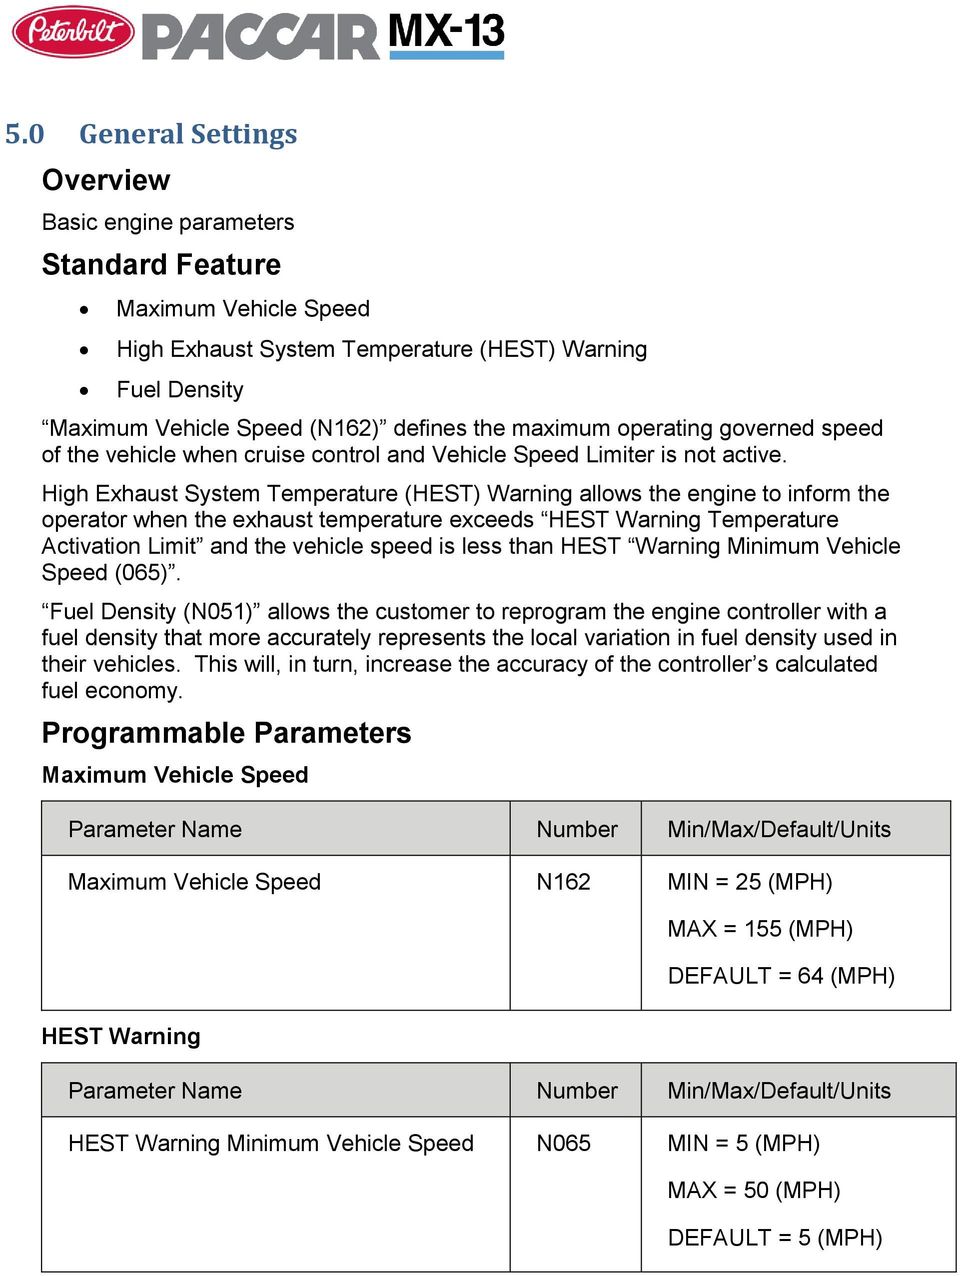 High Exhaust System Temperature (HEST) Warning allows the engine to inform the operator when the exhaust temperature exceeds HEST Warning Temperature Activation Limit and the vehicle speed is less